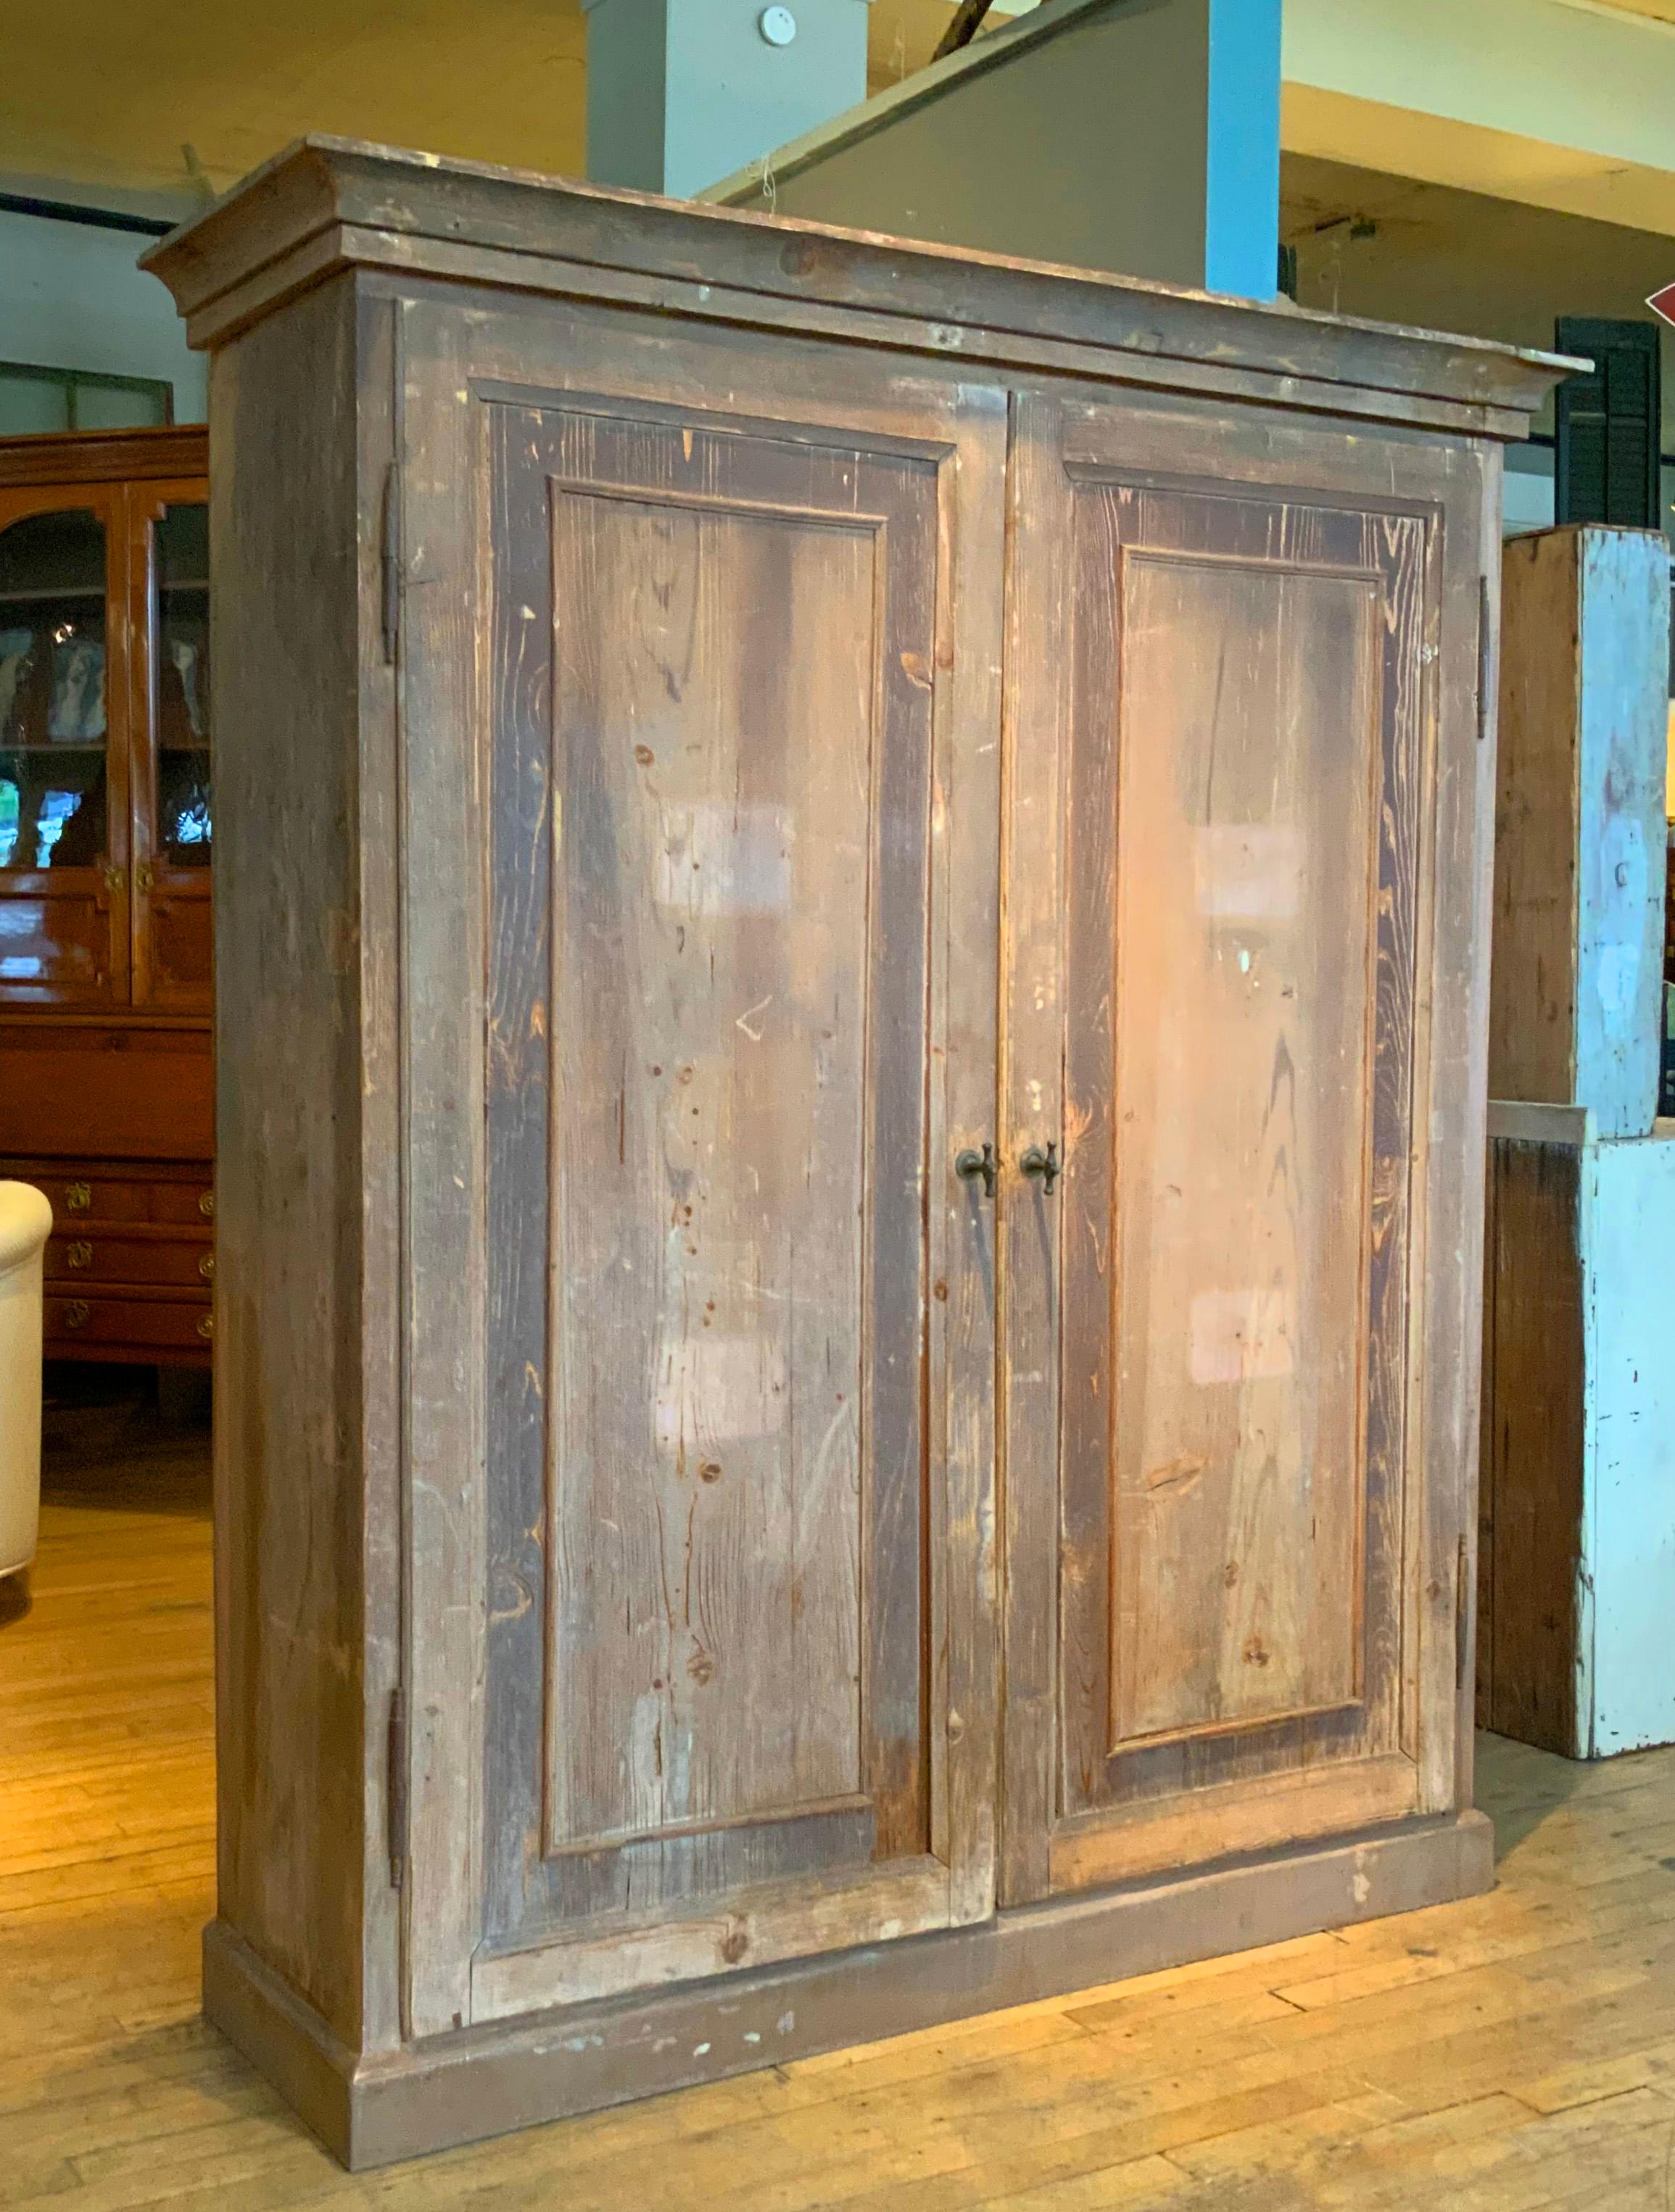 A beautiful Italian natural wood two door cabinet, with divided interior and original hardware. beautiful weathered finish and patina, with crown molding capitals. Wonderful scale and details, and great proportions. Perfect for a wide variety of